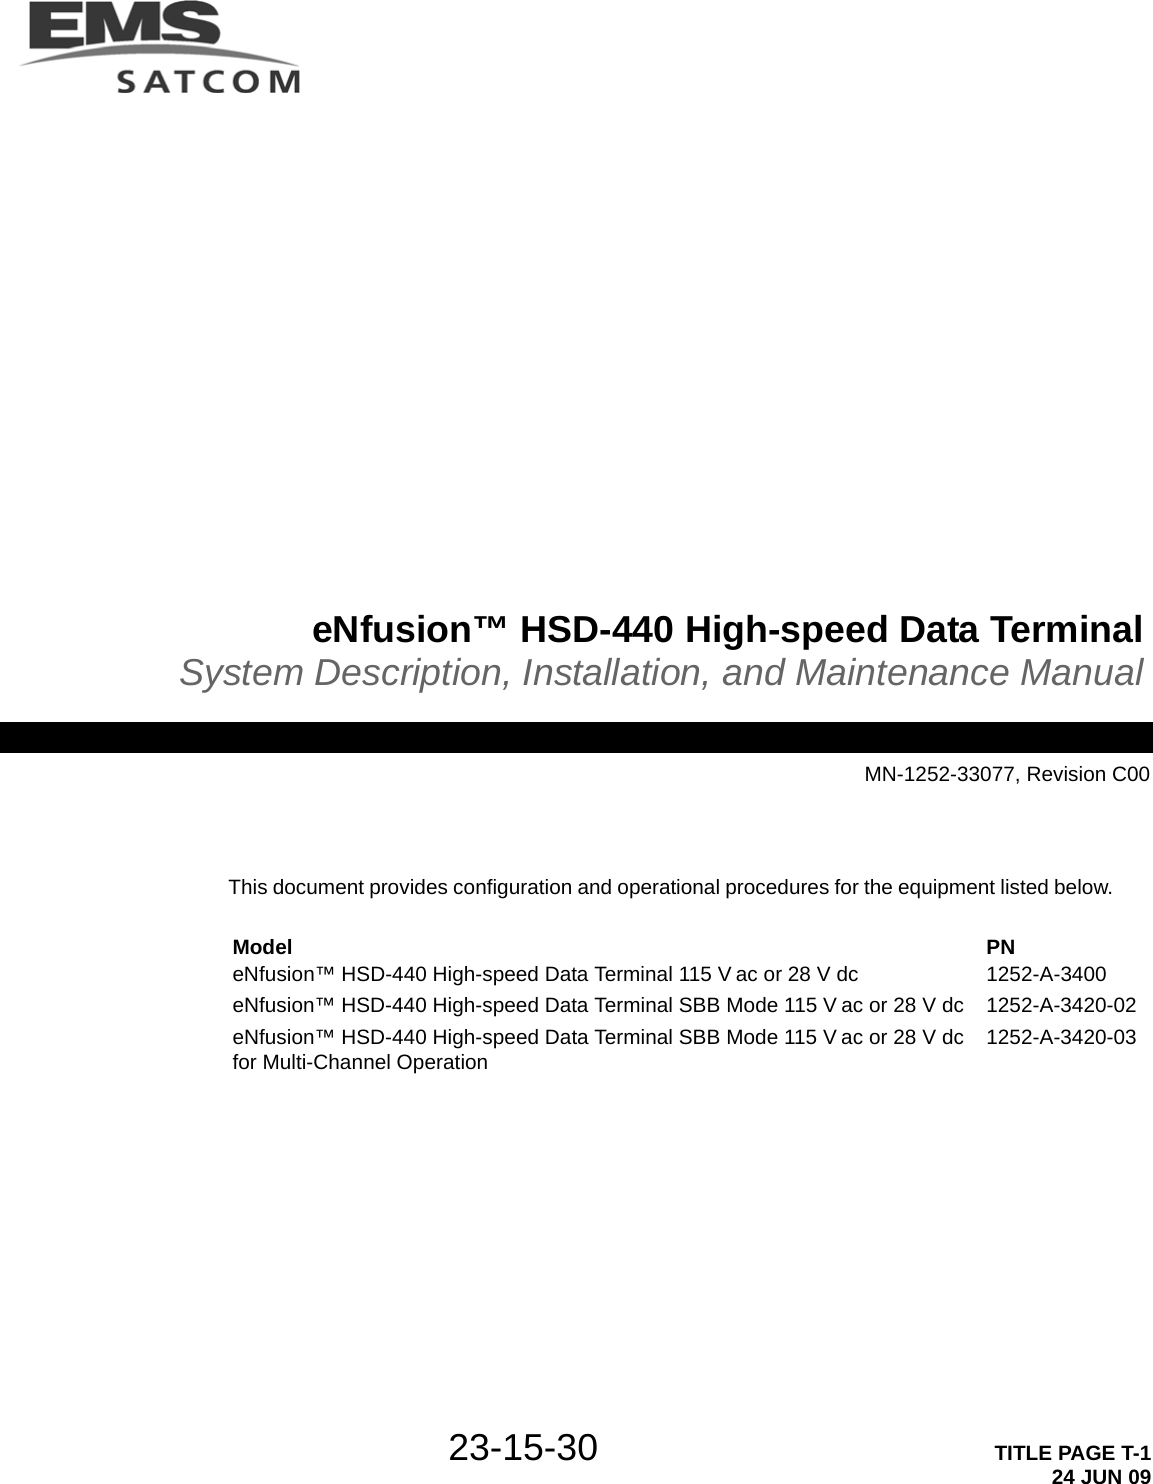 23-15-30 TITLE PAGE T-124 JUN 09eNfusion™ HSD-440 High-speed Data TerminalSystem Description, Installation, and Maintenance ManualMN-1252-33077, Revision C00This document provides configuration and operational procedures for the equipment listed below.Model PNeNfusion™ HSD-440 High-speed Data Terminal 115 V ac or 28 V dceNfusion™ HSD-440 High-speed Data Terminal SBB Mode 115 V ac or 28 V dceNfusion™ HSD-440 High-speed Data Terminal SBB Mode 115 V ac or 28 V dc for Multi-Channel Operation1252-A-34001252-A-3420-021252-A-3420-03